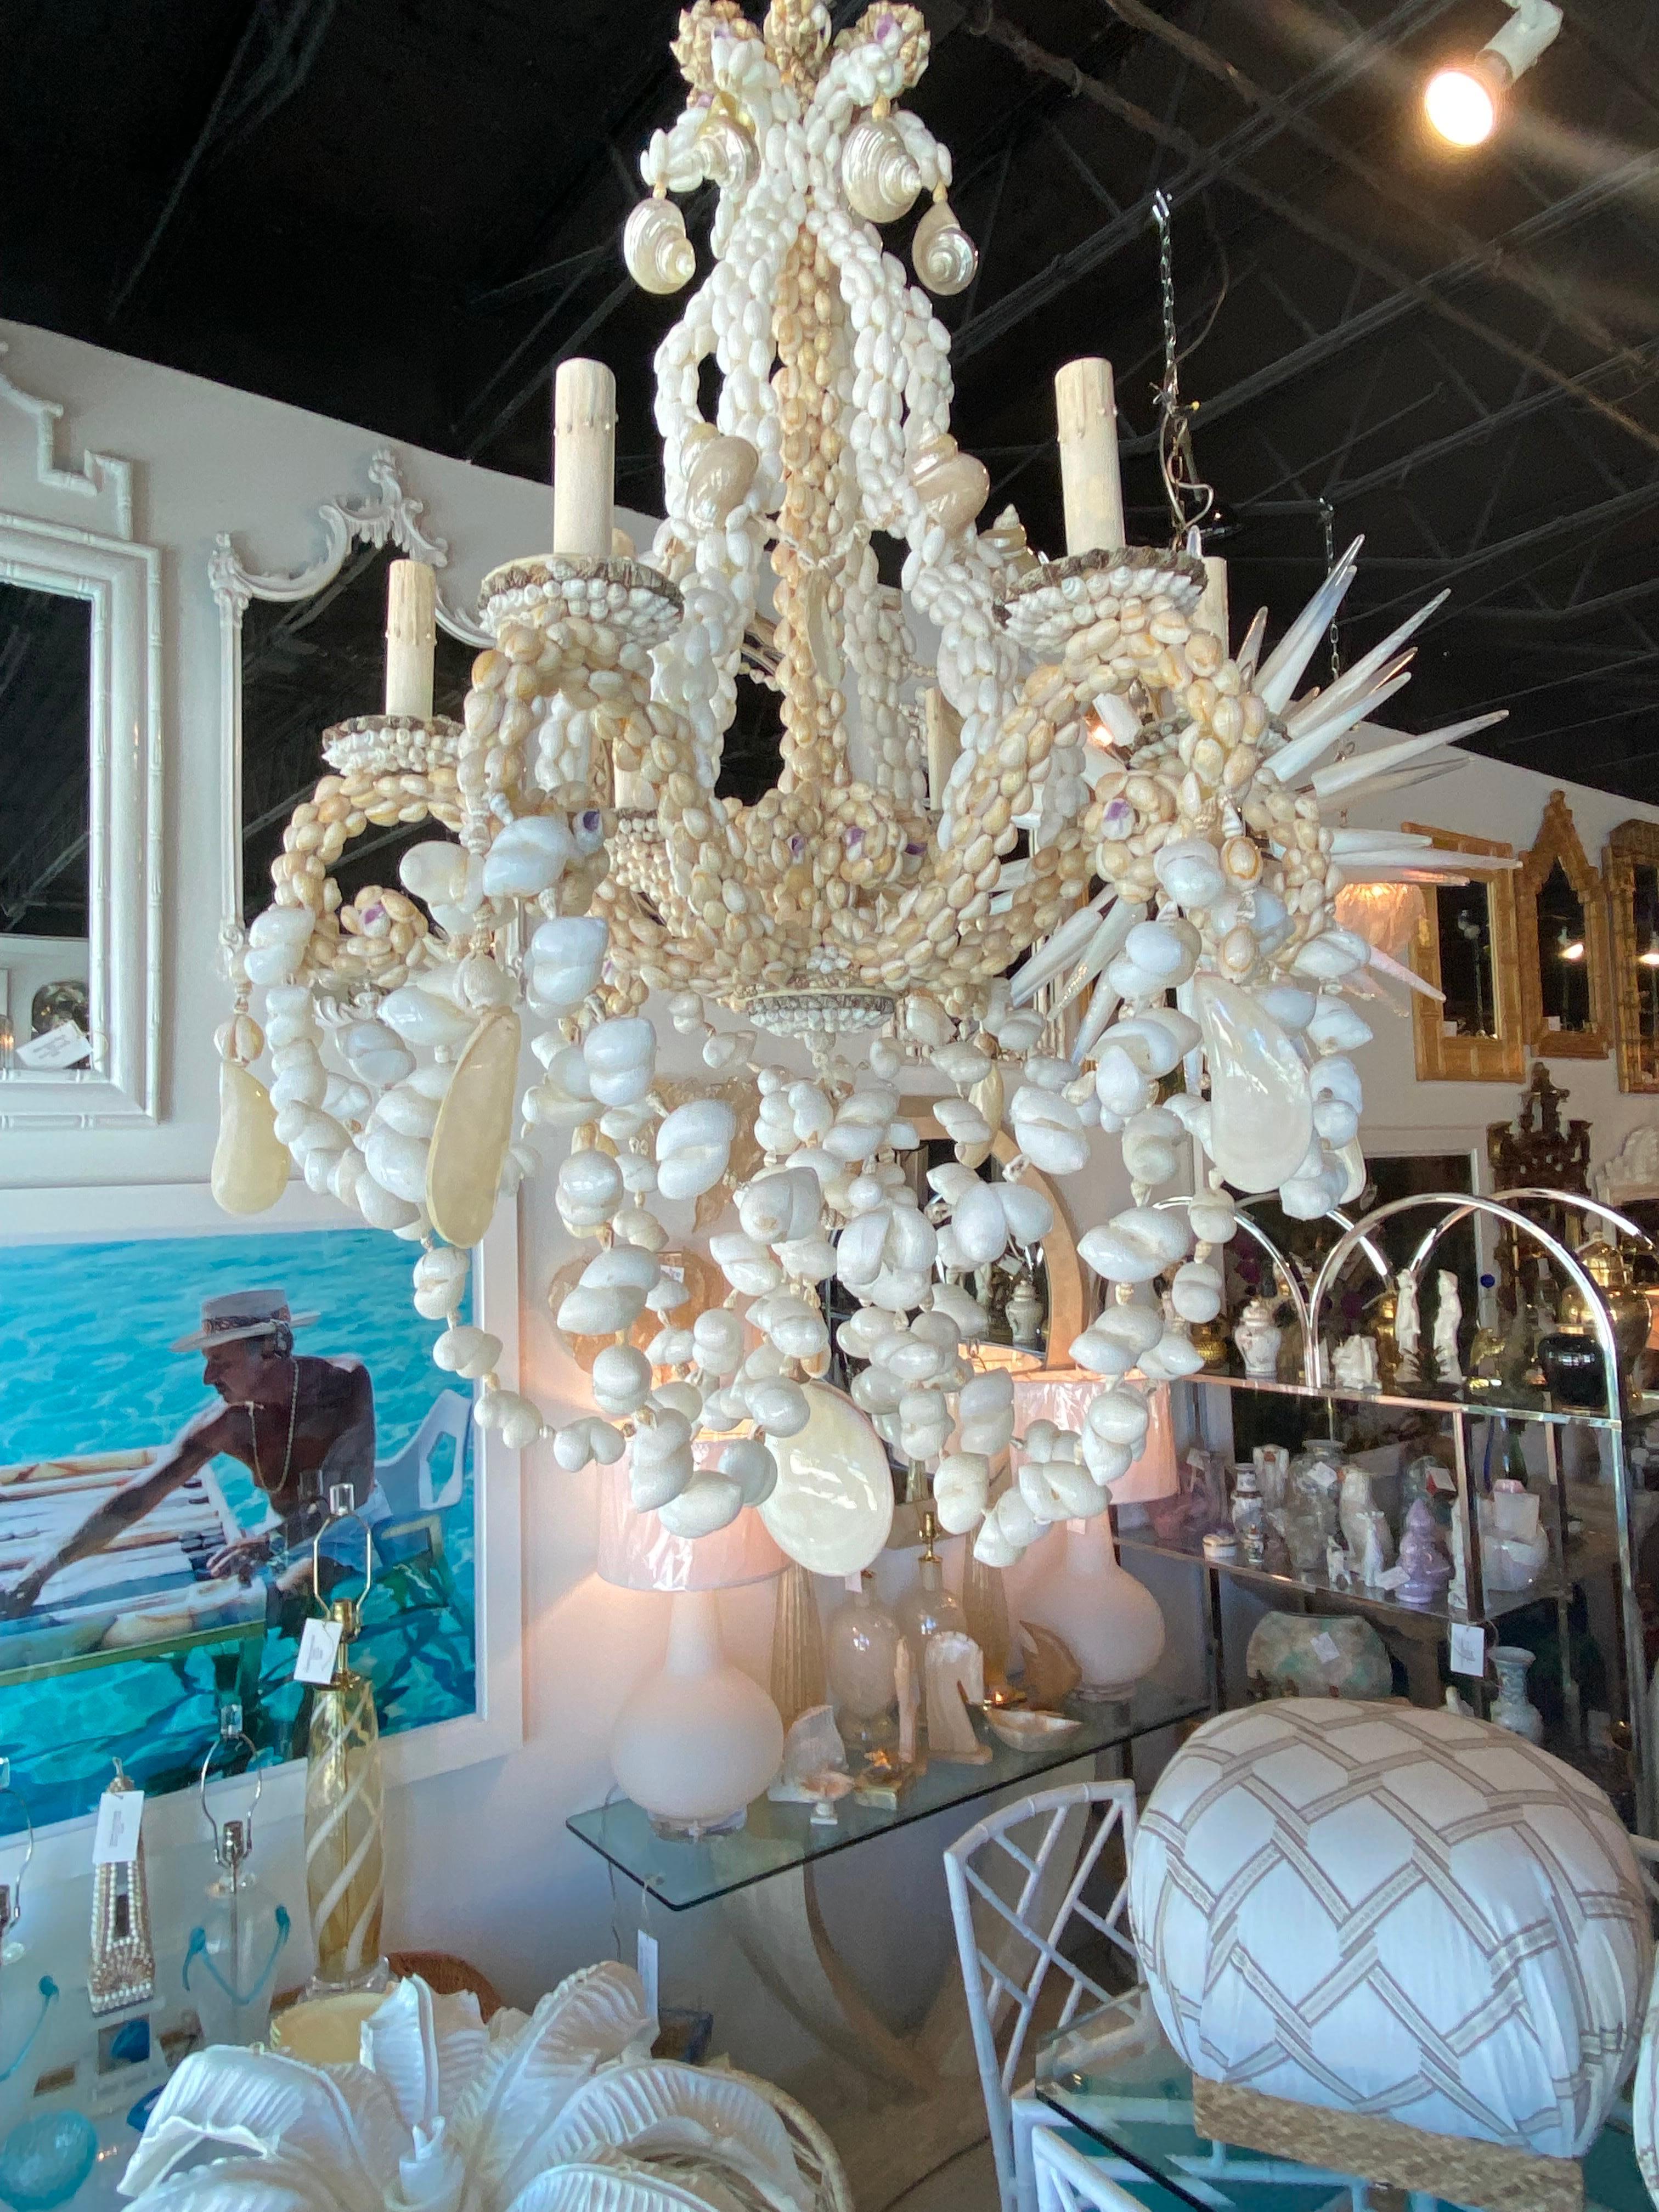 Beautiful vintage seashell shell 6 light chandelier. No missing or broken shells. Comes with original ceiling cap. Size is 34 H x 24 D, chandelier only, size does not include the chain on it.